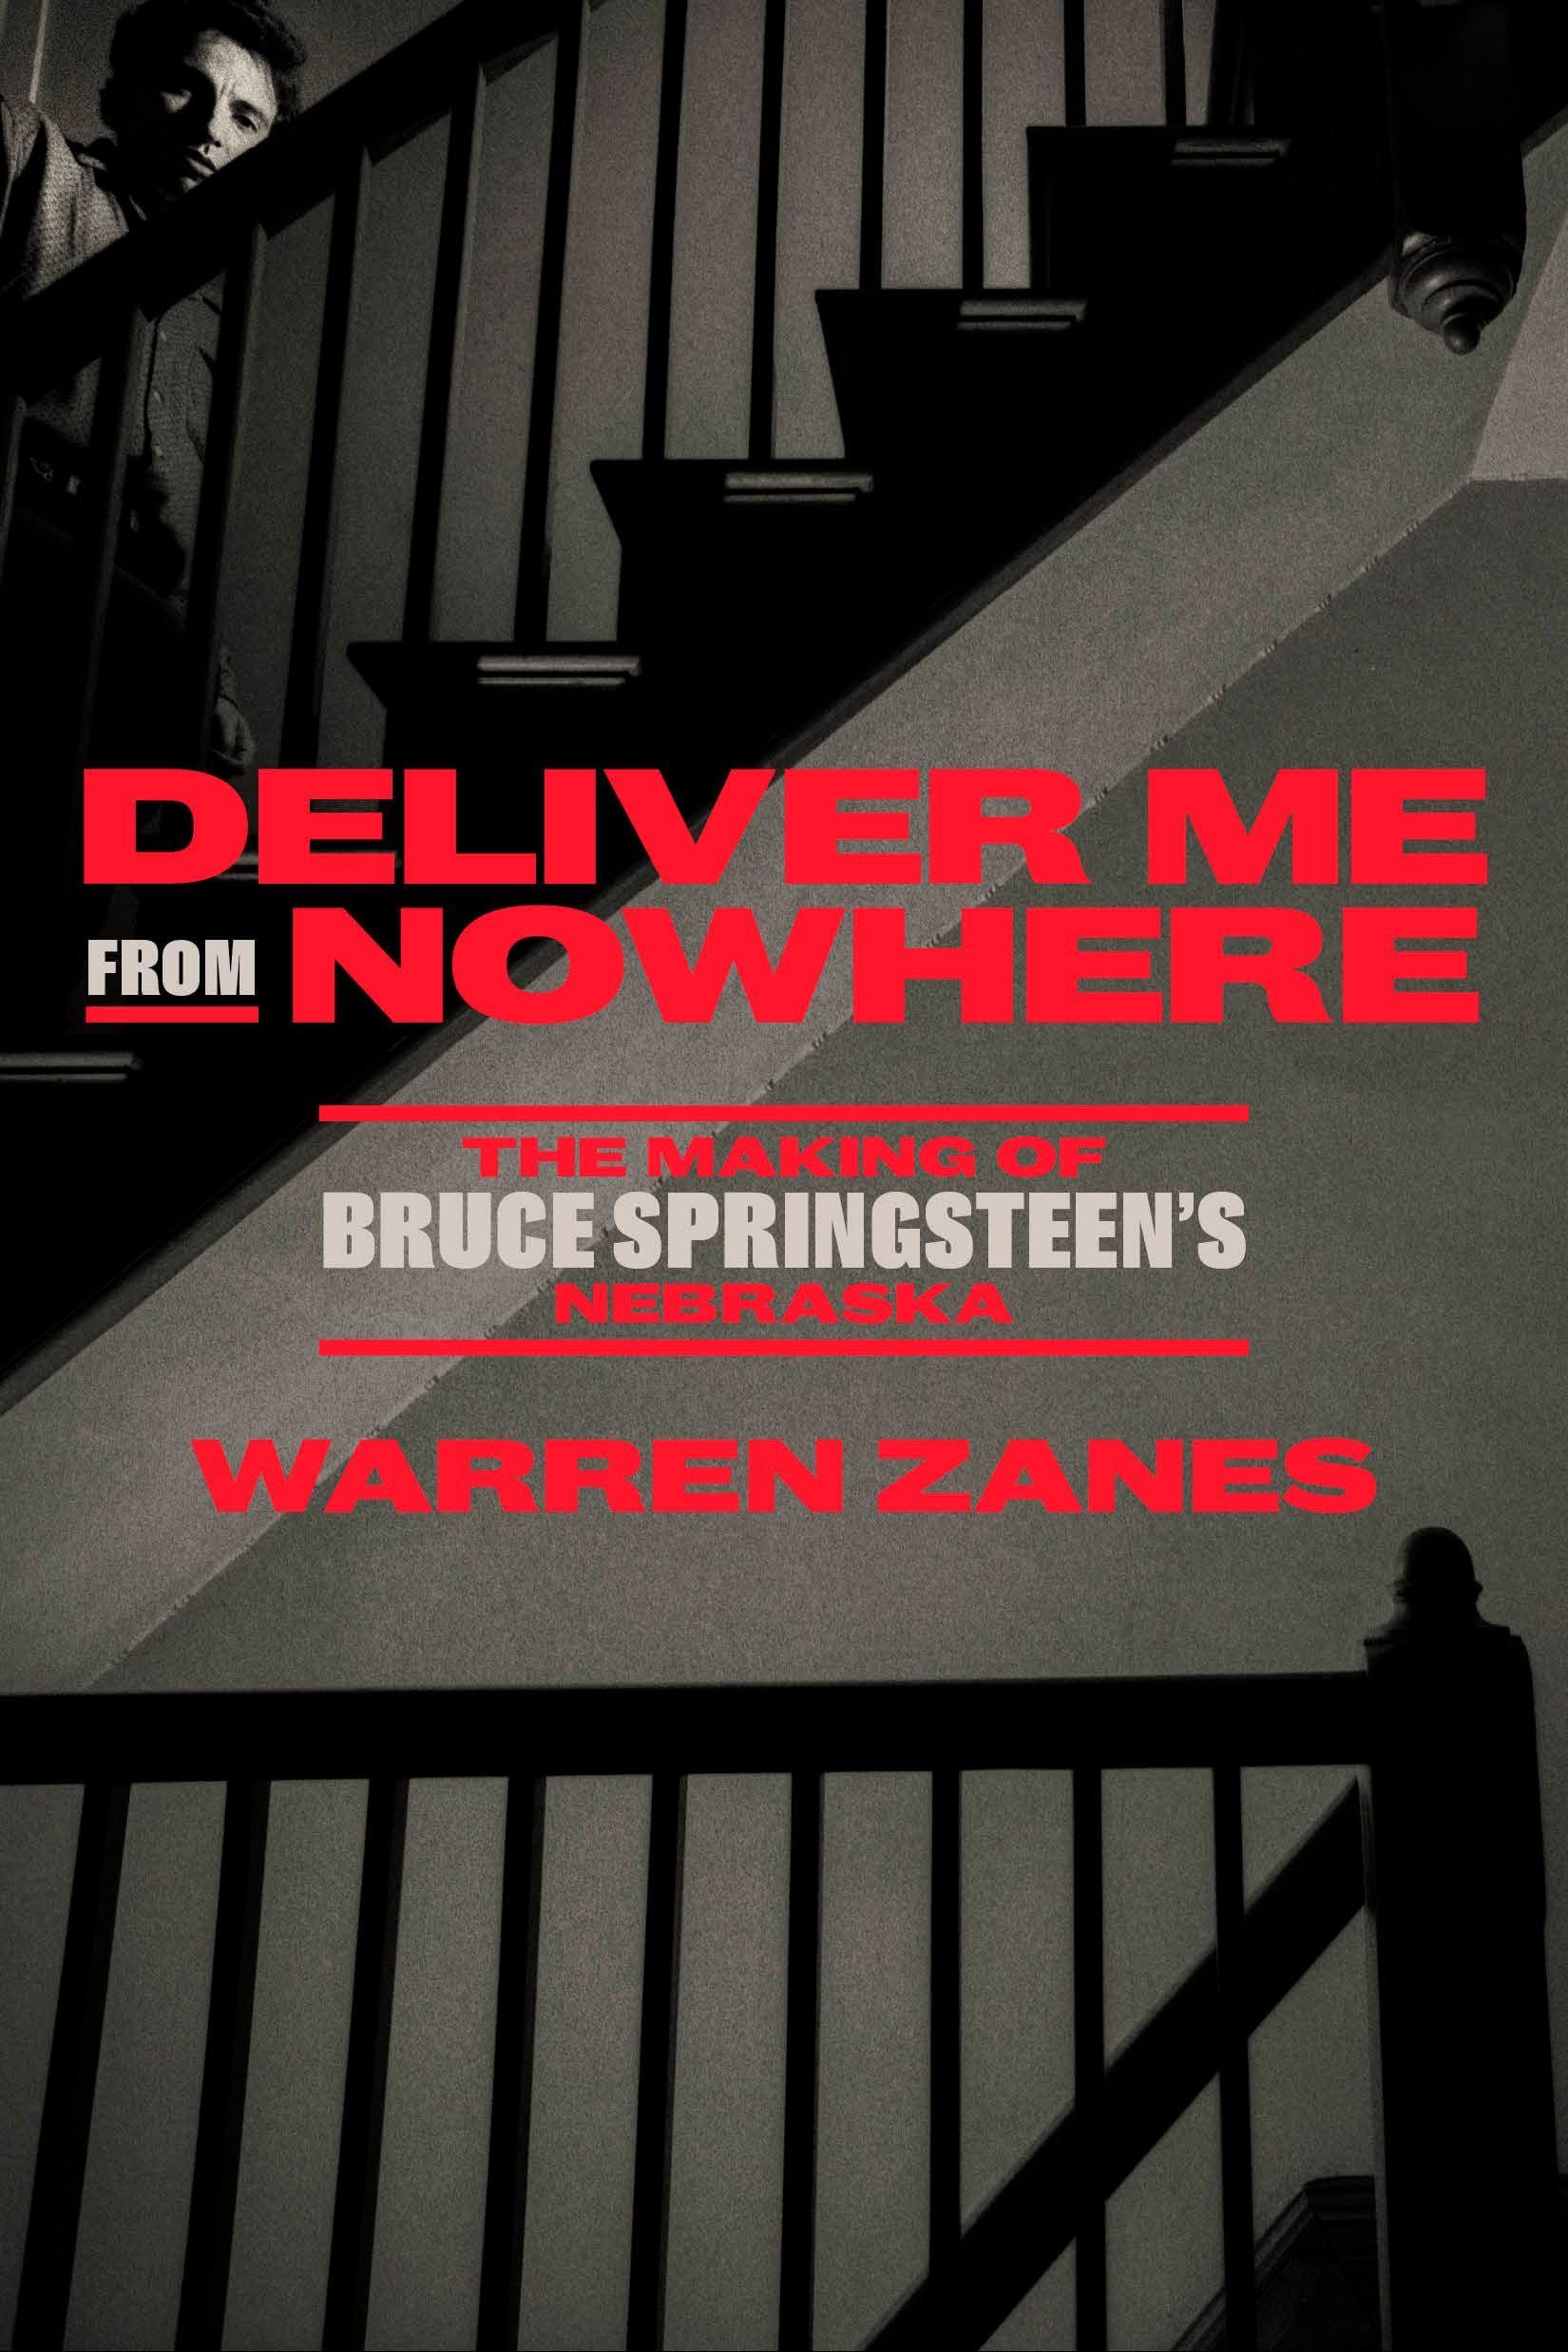 How Much Faith Is Left?: On Warren Zanes’s “Deliver Me from Nowhere”